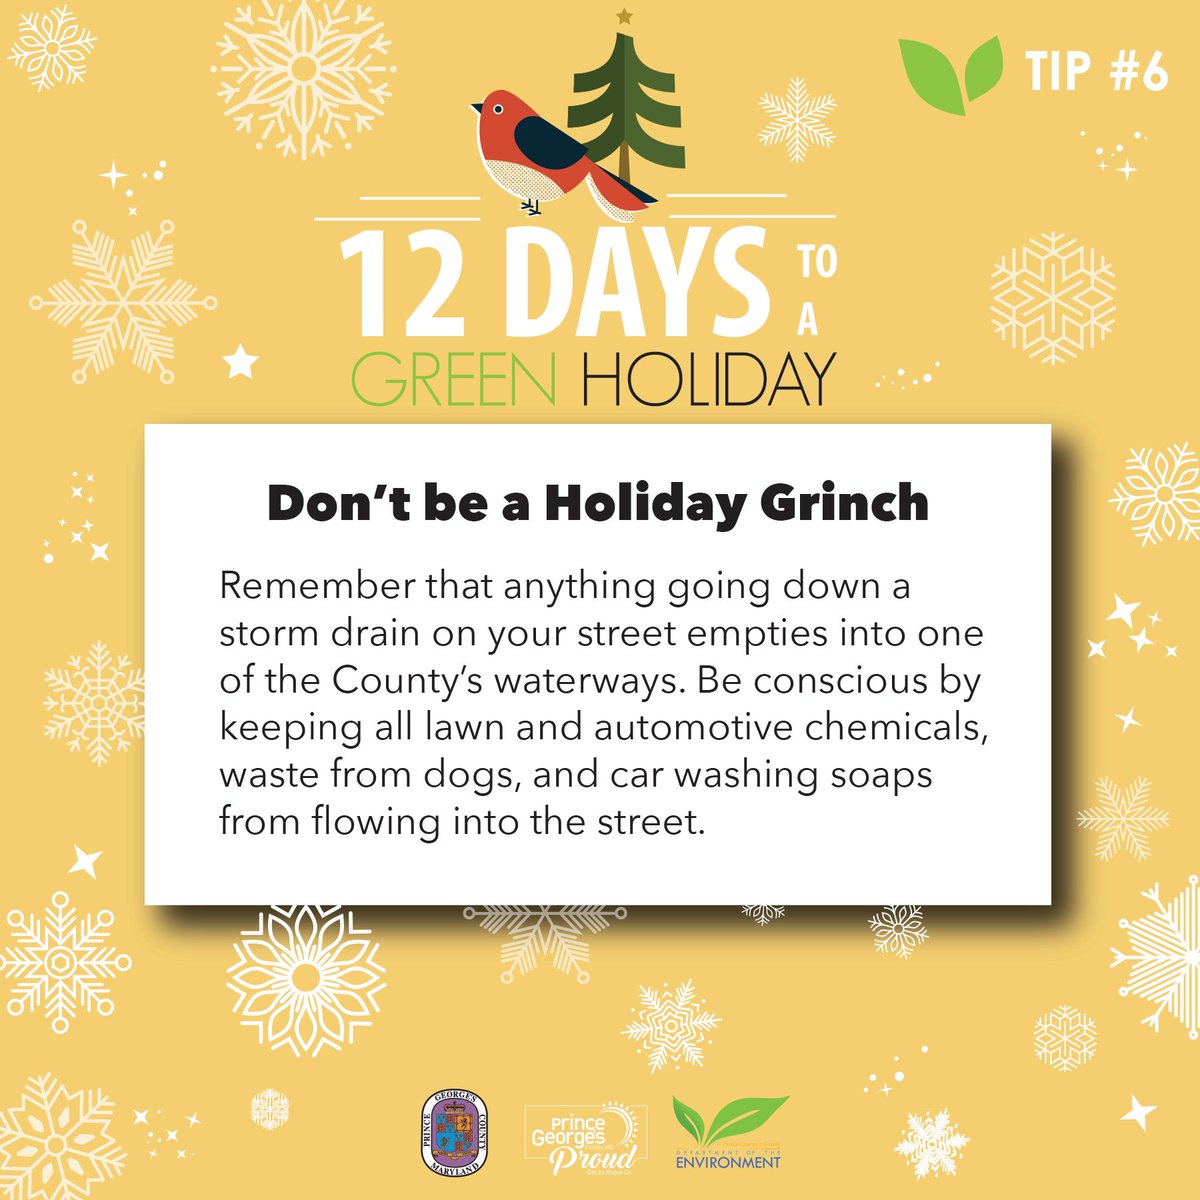 P.G. County's Day 6 of 12 Days to a Green Holiday

Tip 6 in #12DaystoAGreenHoliday - don’t be a Grinch and let your spirit go down the drain. Take your car to the car wash, #ScoopThatPoop, use salt wisely, and prevent debris from going into the street.

#12DaystoAGreenHoliday